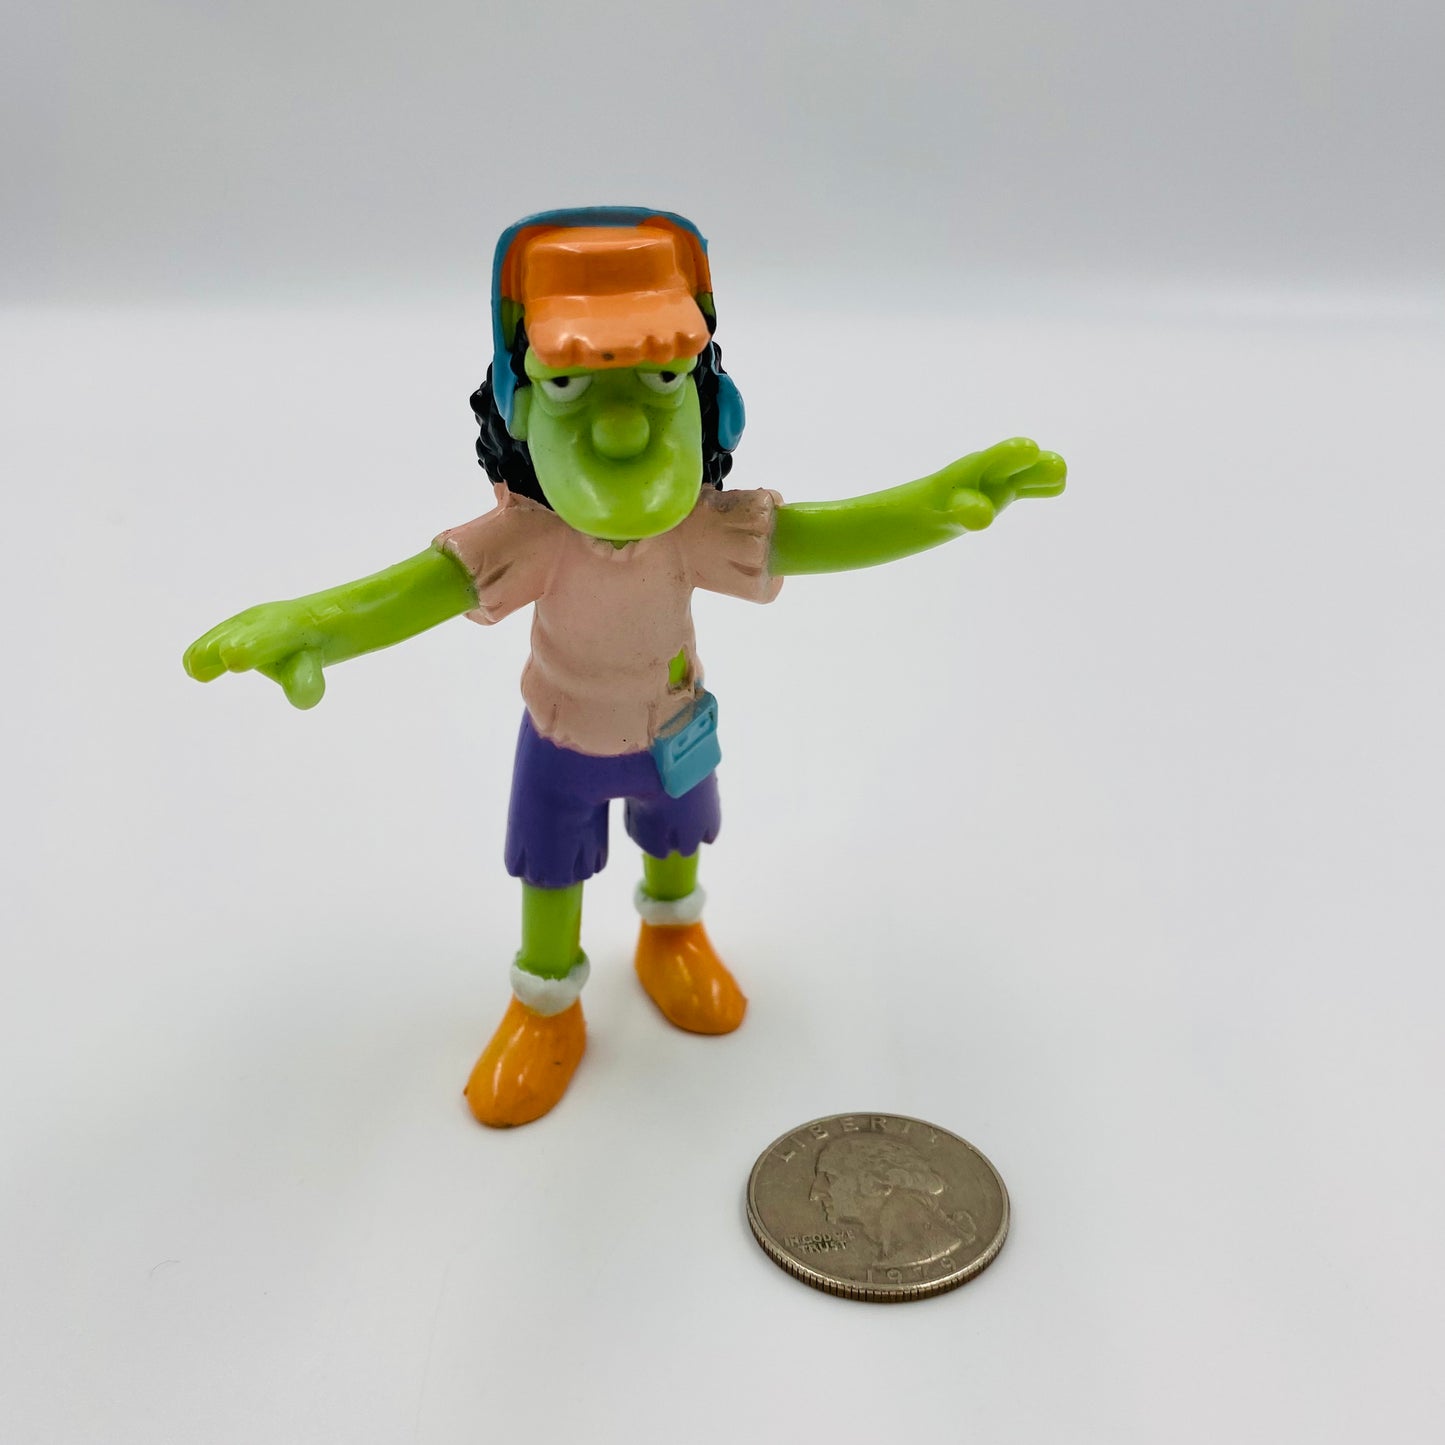 The Simpsons Creepy Classics Otto Burger King Kids' Meals toy (2002) figure only